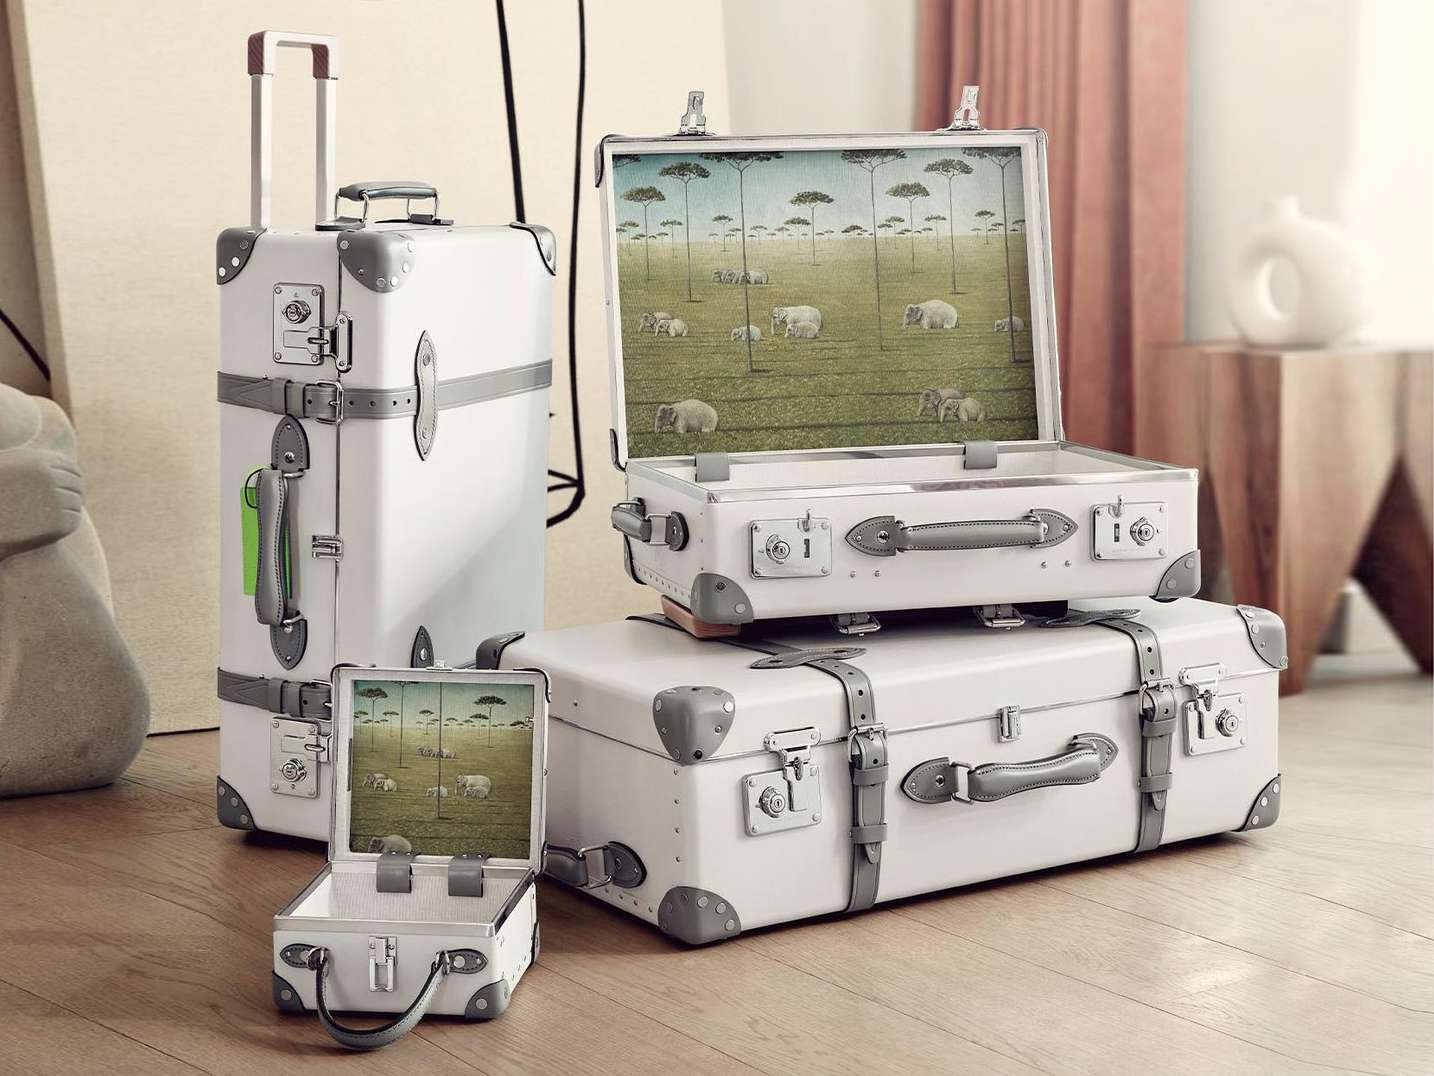 globe trotter suitcases in stack